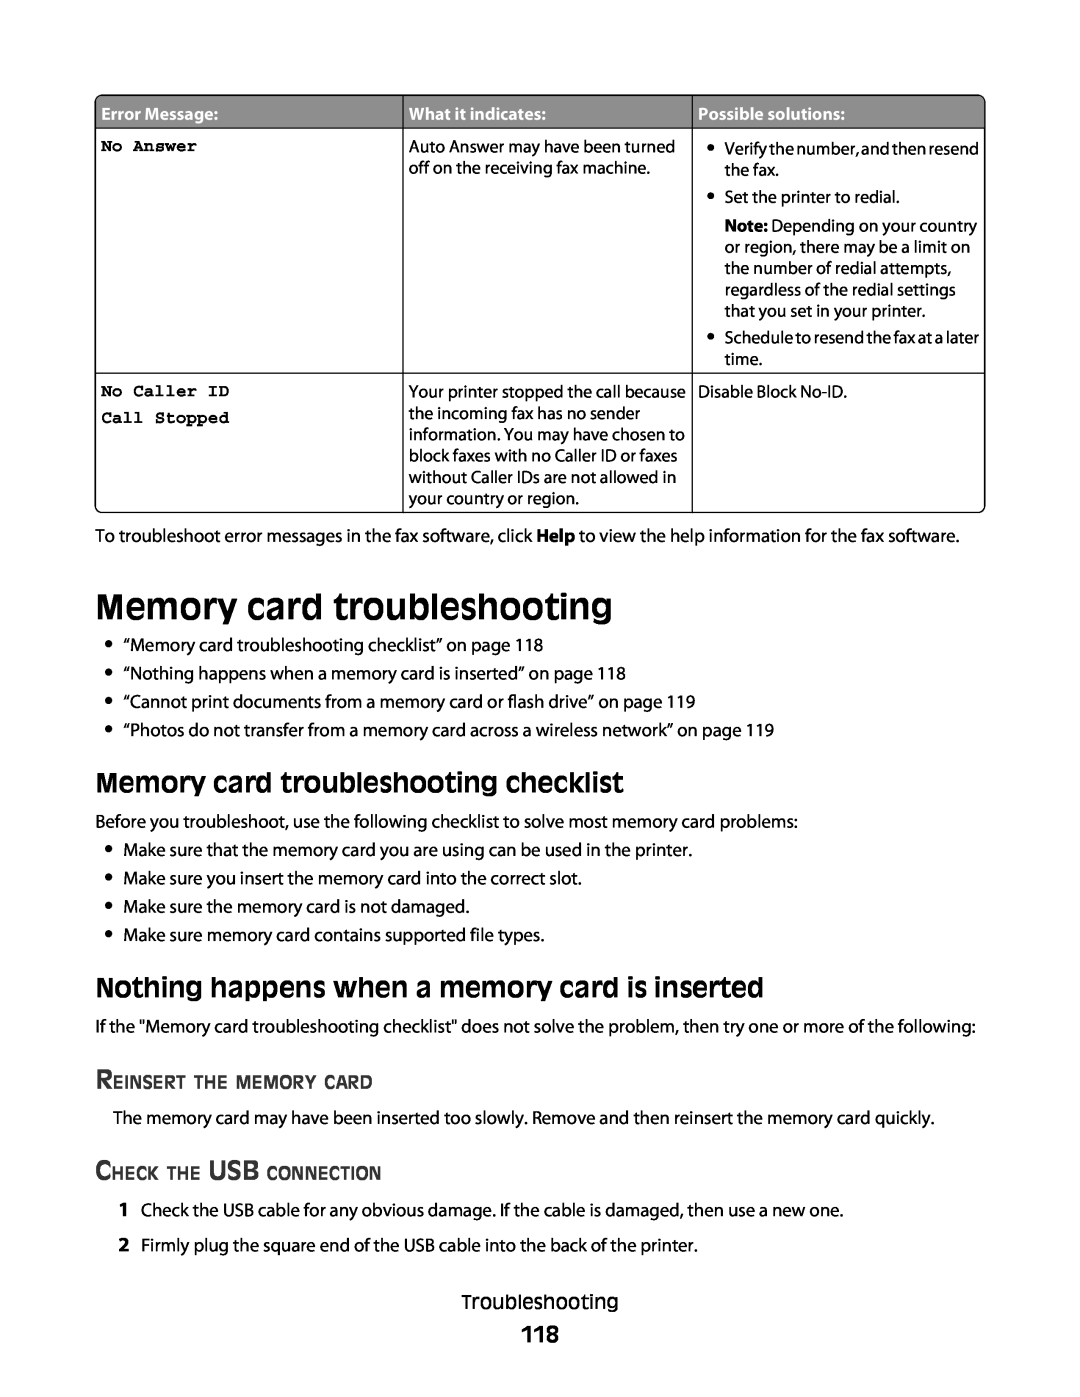 Dell V515W manual Memory card troubleshooting checklist, Nothing happens when a memory card is inserted 